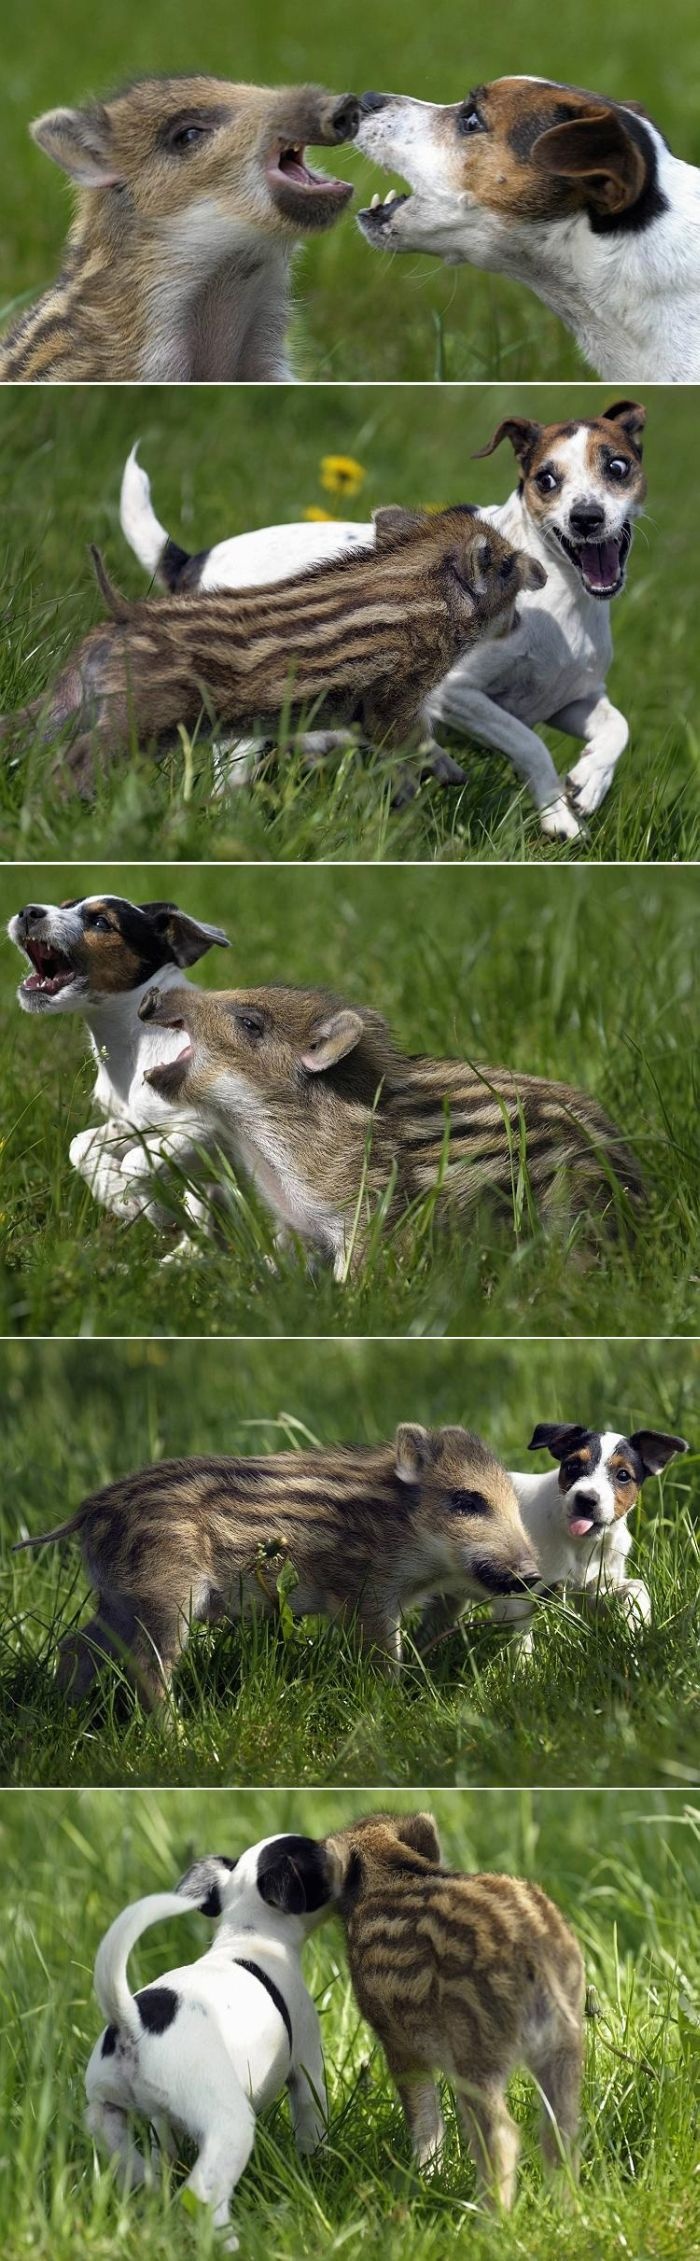 A five week old boar plays with Candy, the jack Russell terrier in Ehringhausen, Germany.